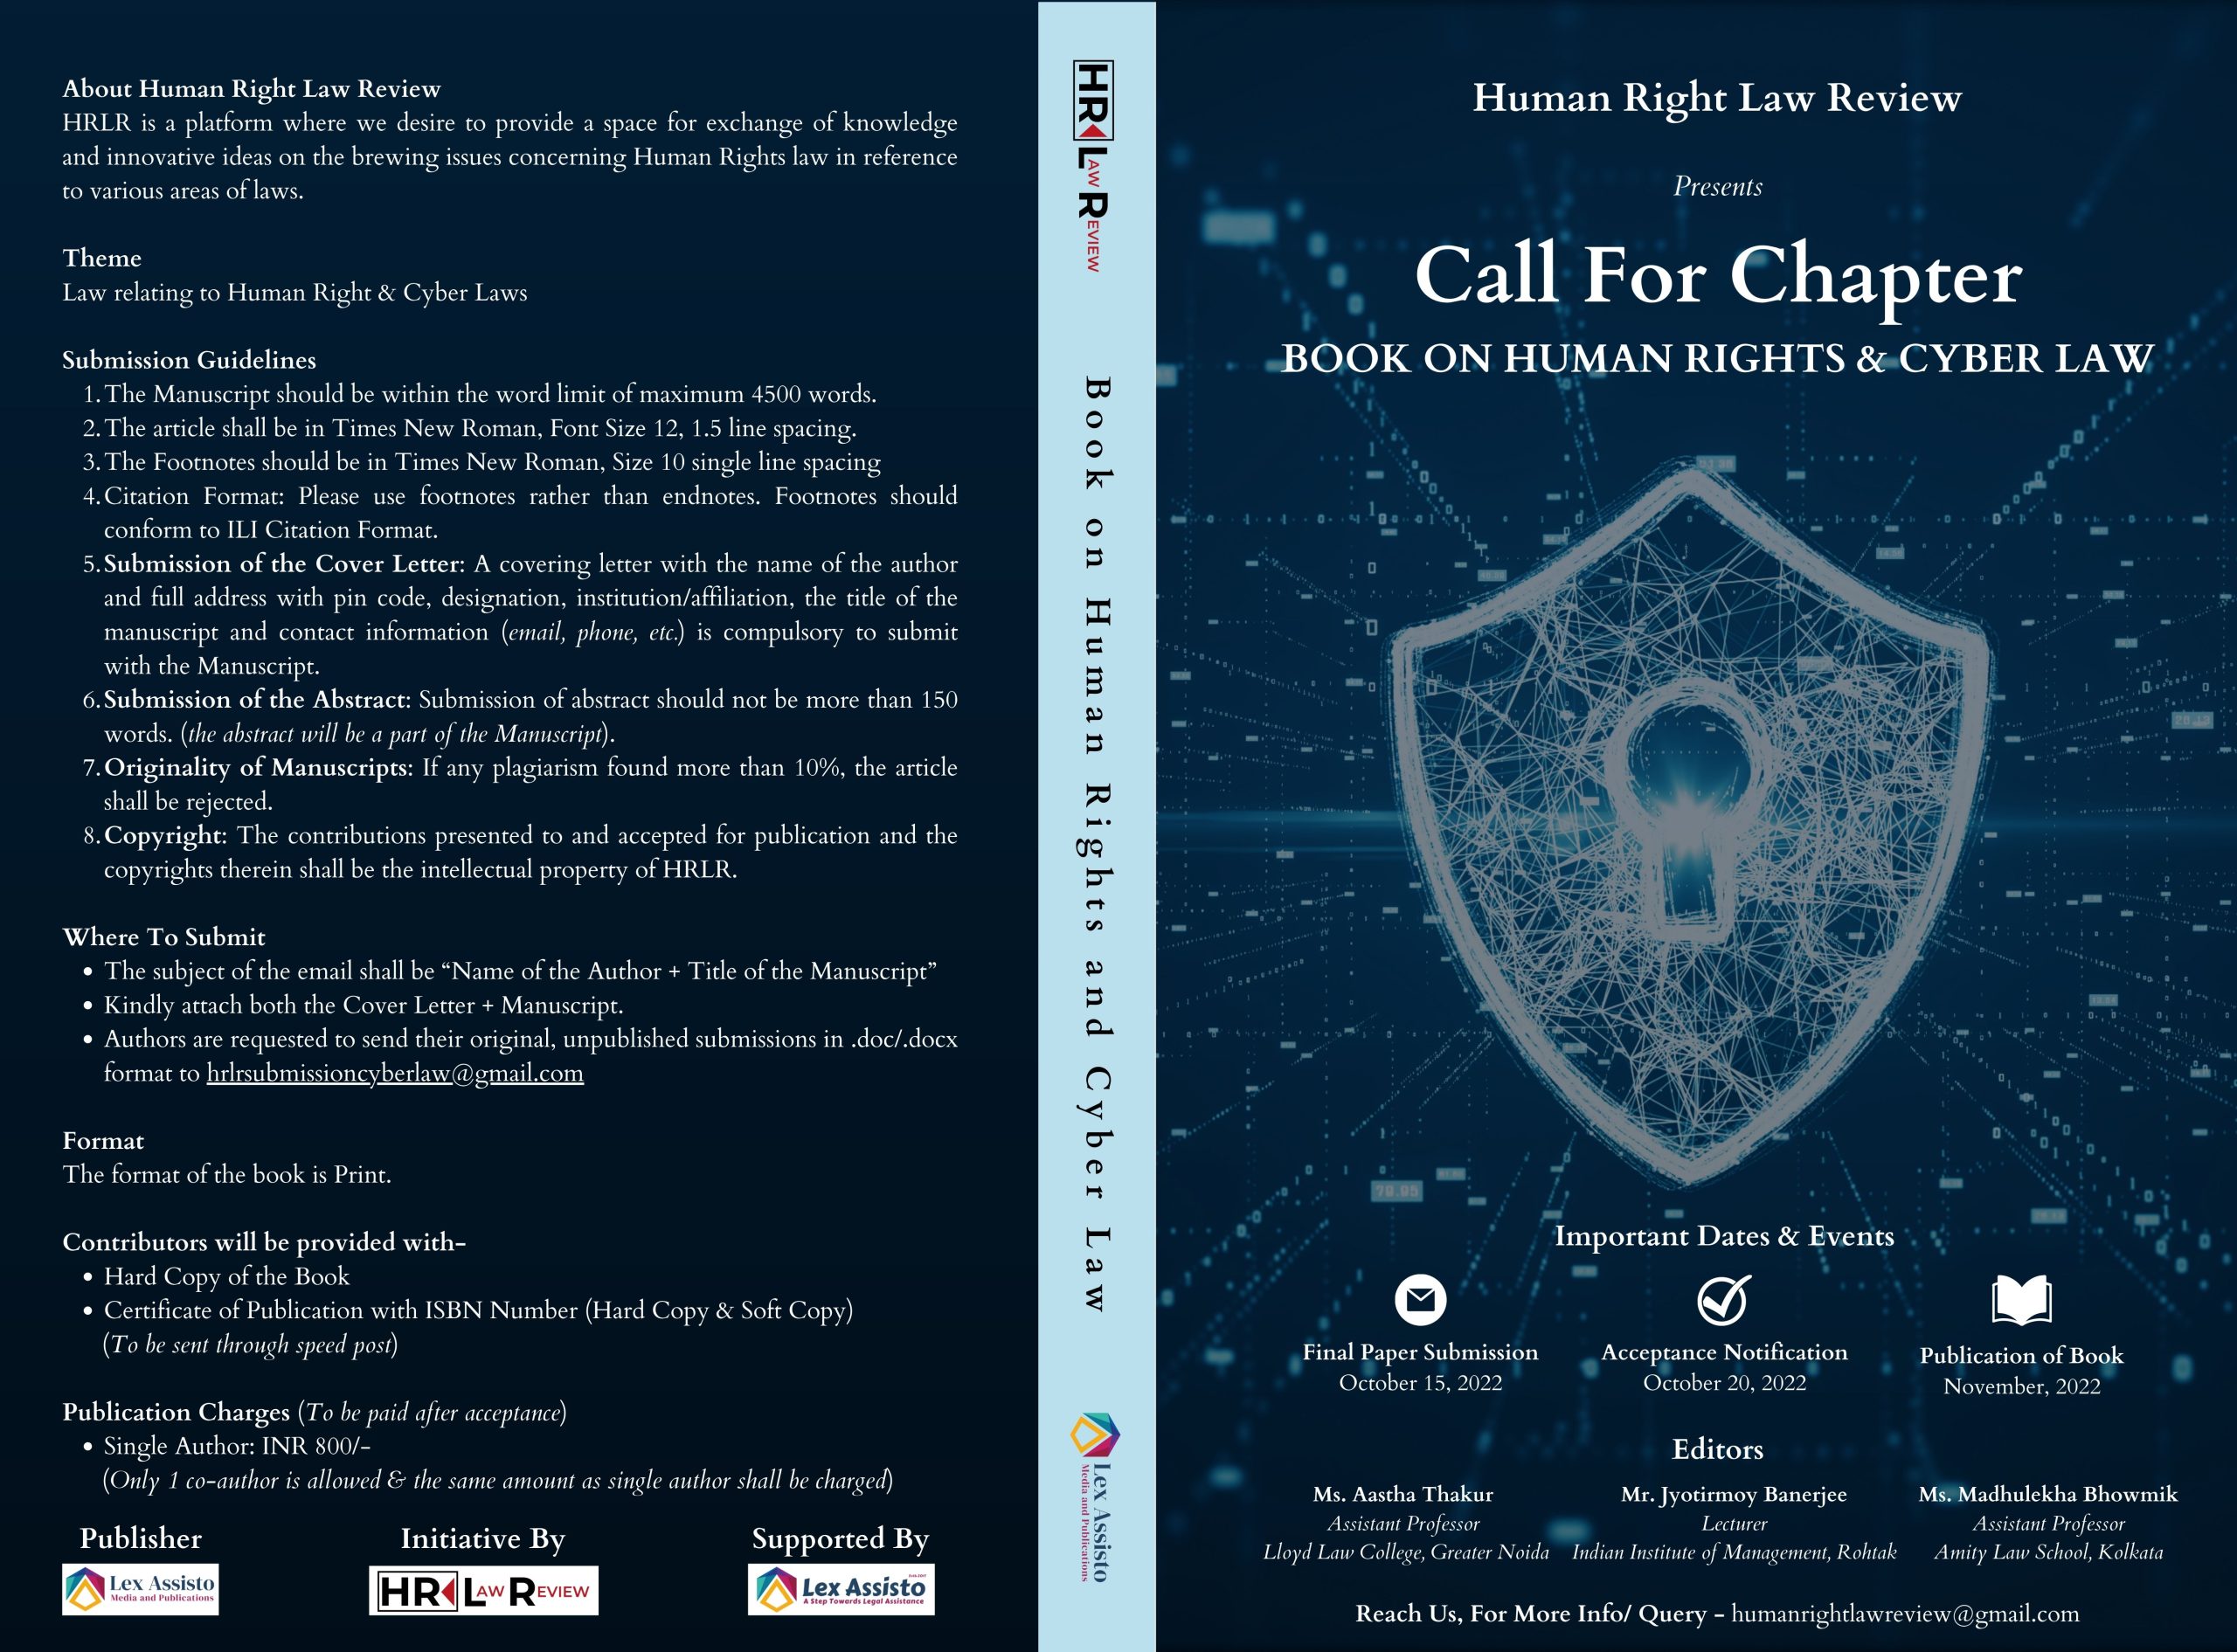 Call For Chapters: Book on Human Rights and Cyber Law